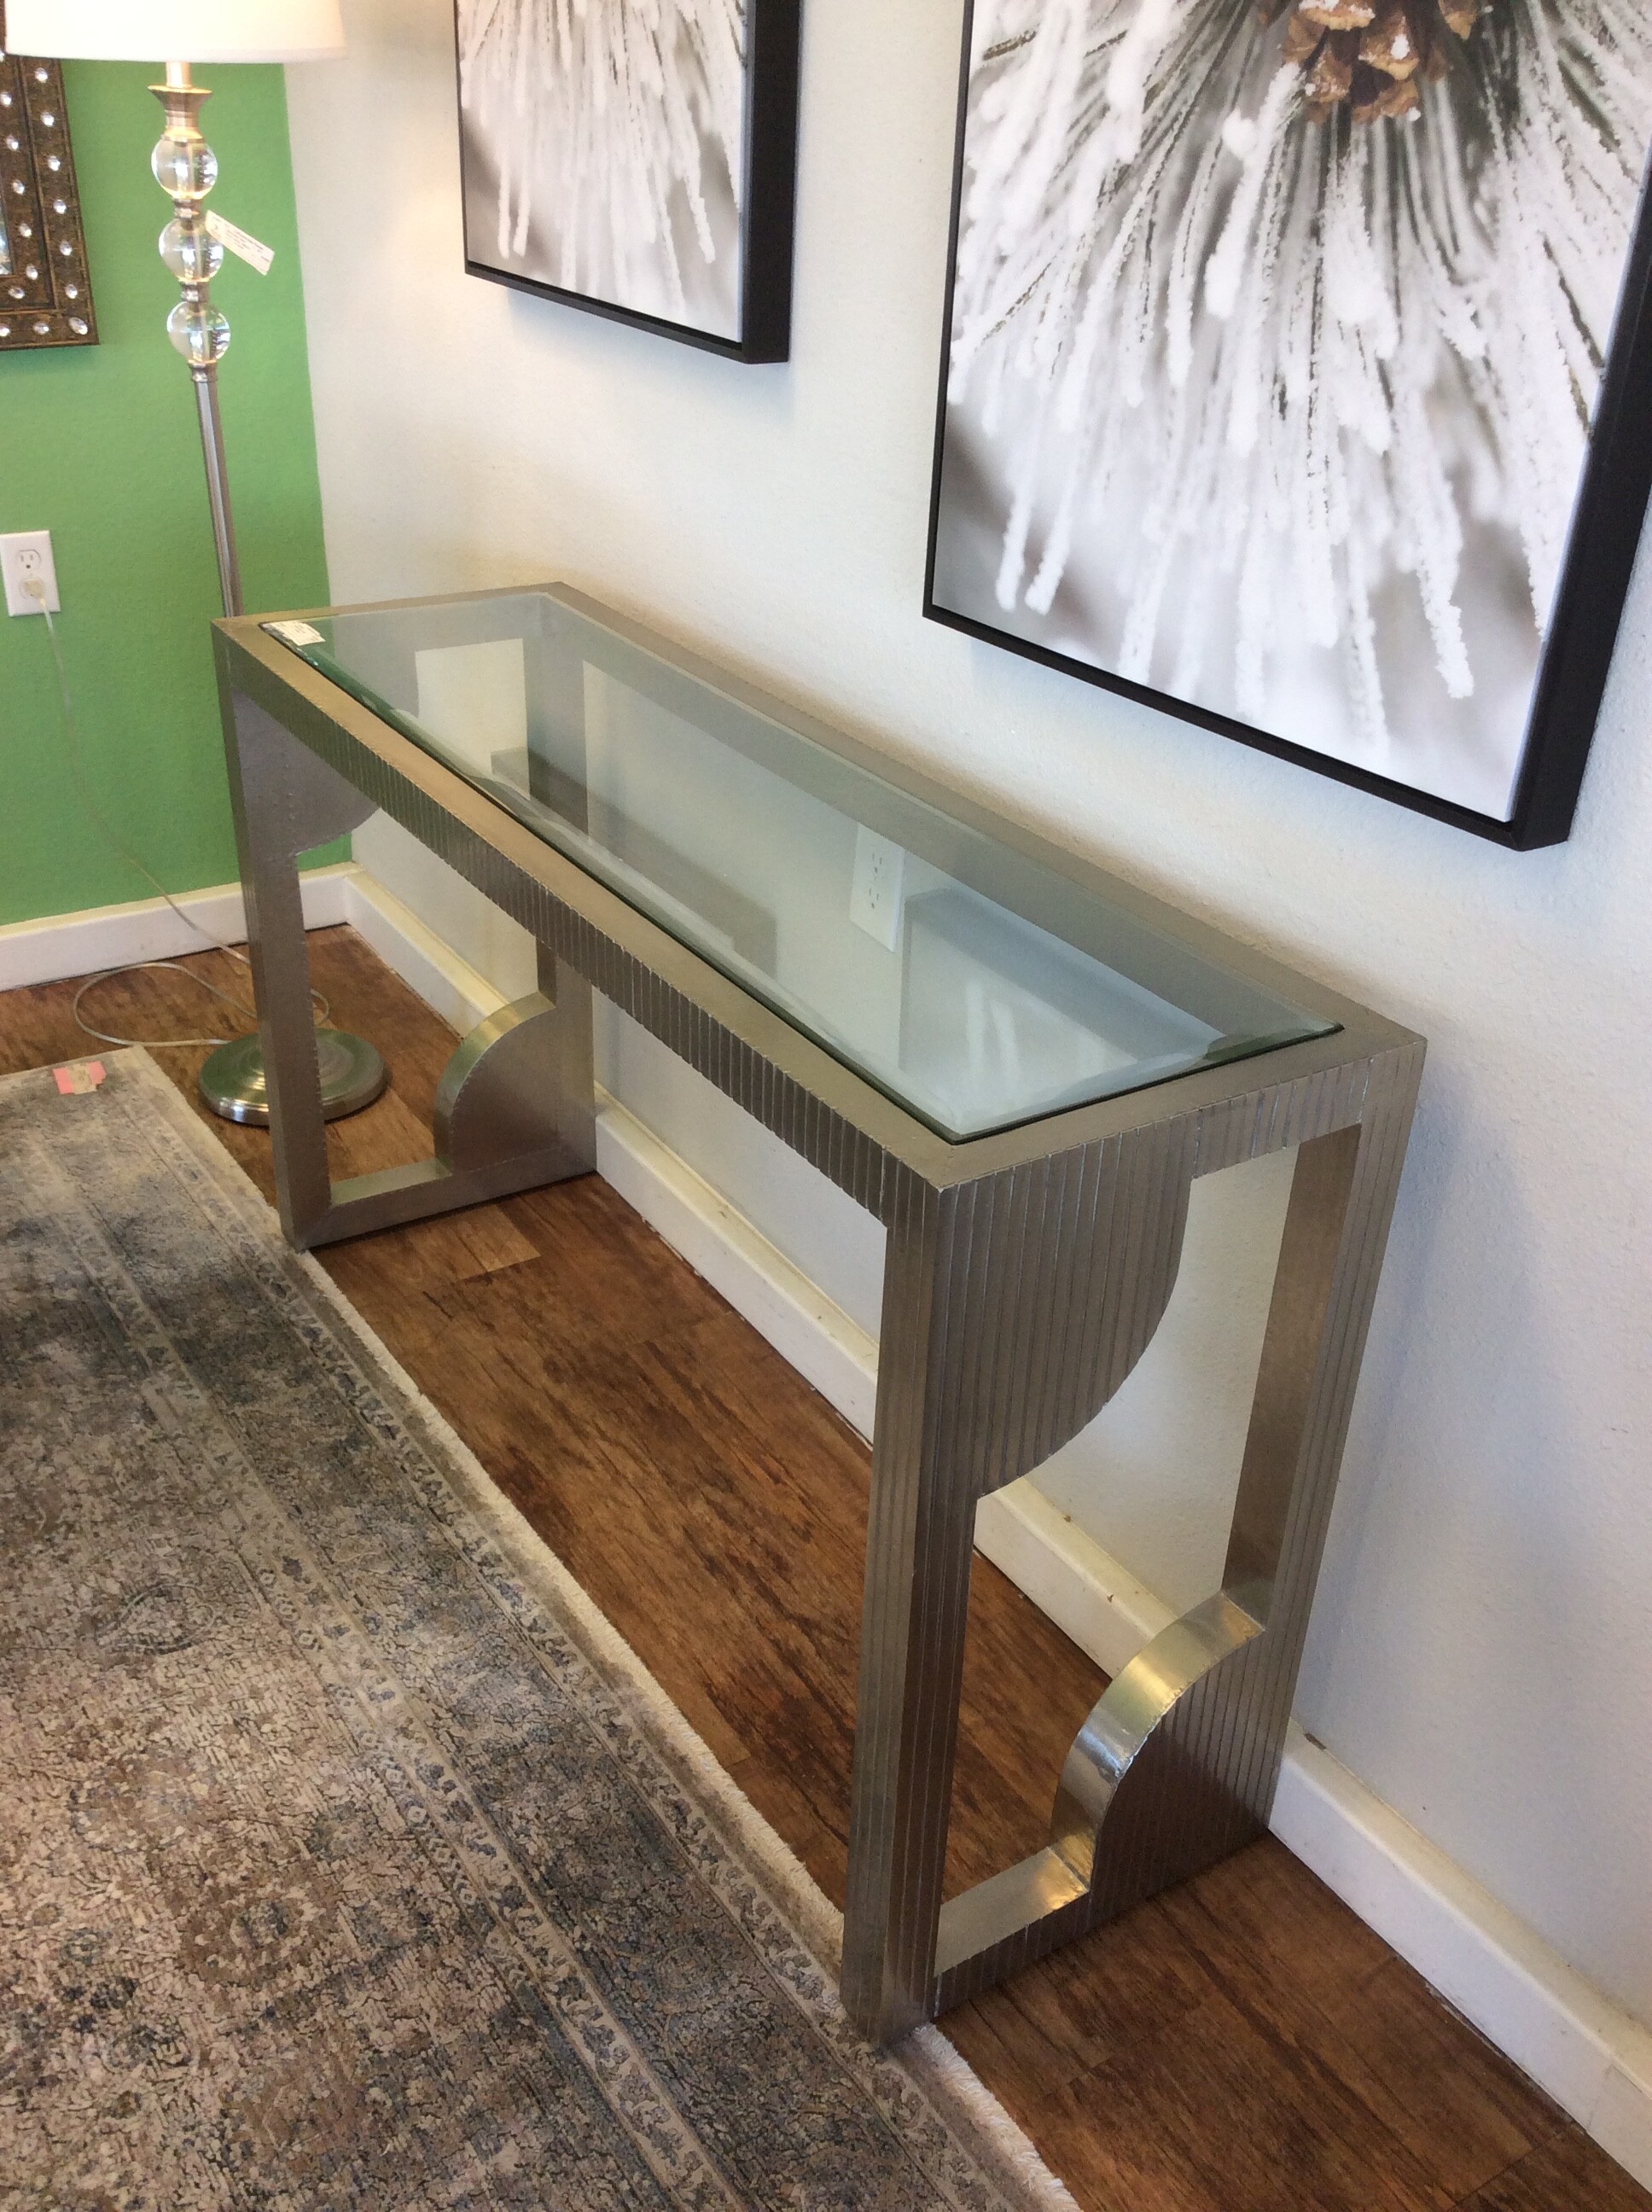 This contemporary style console table has a silver metal finish and a geometric design.